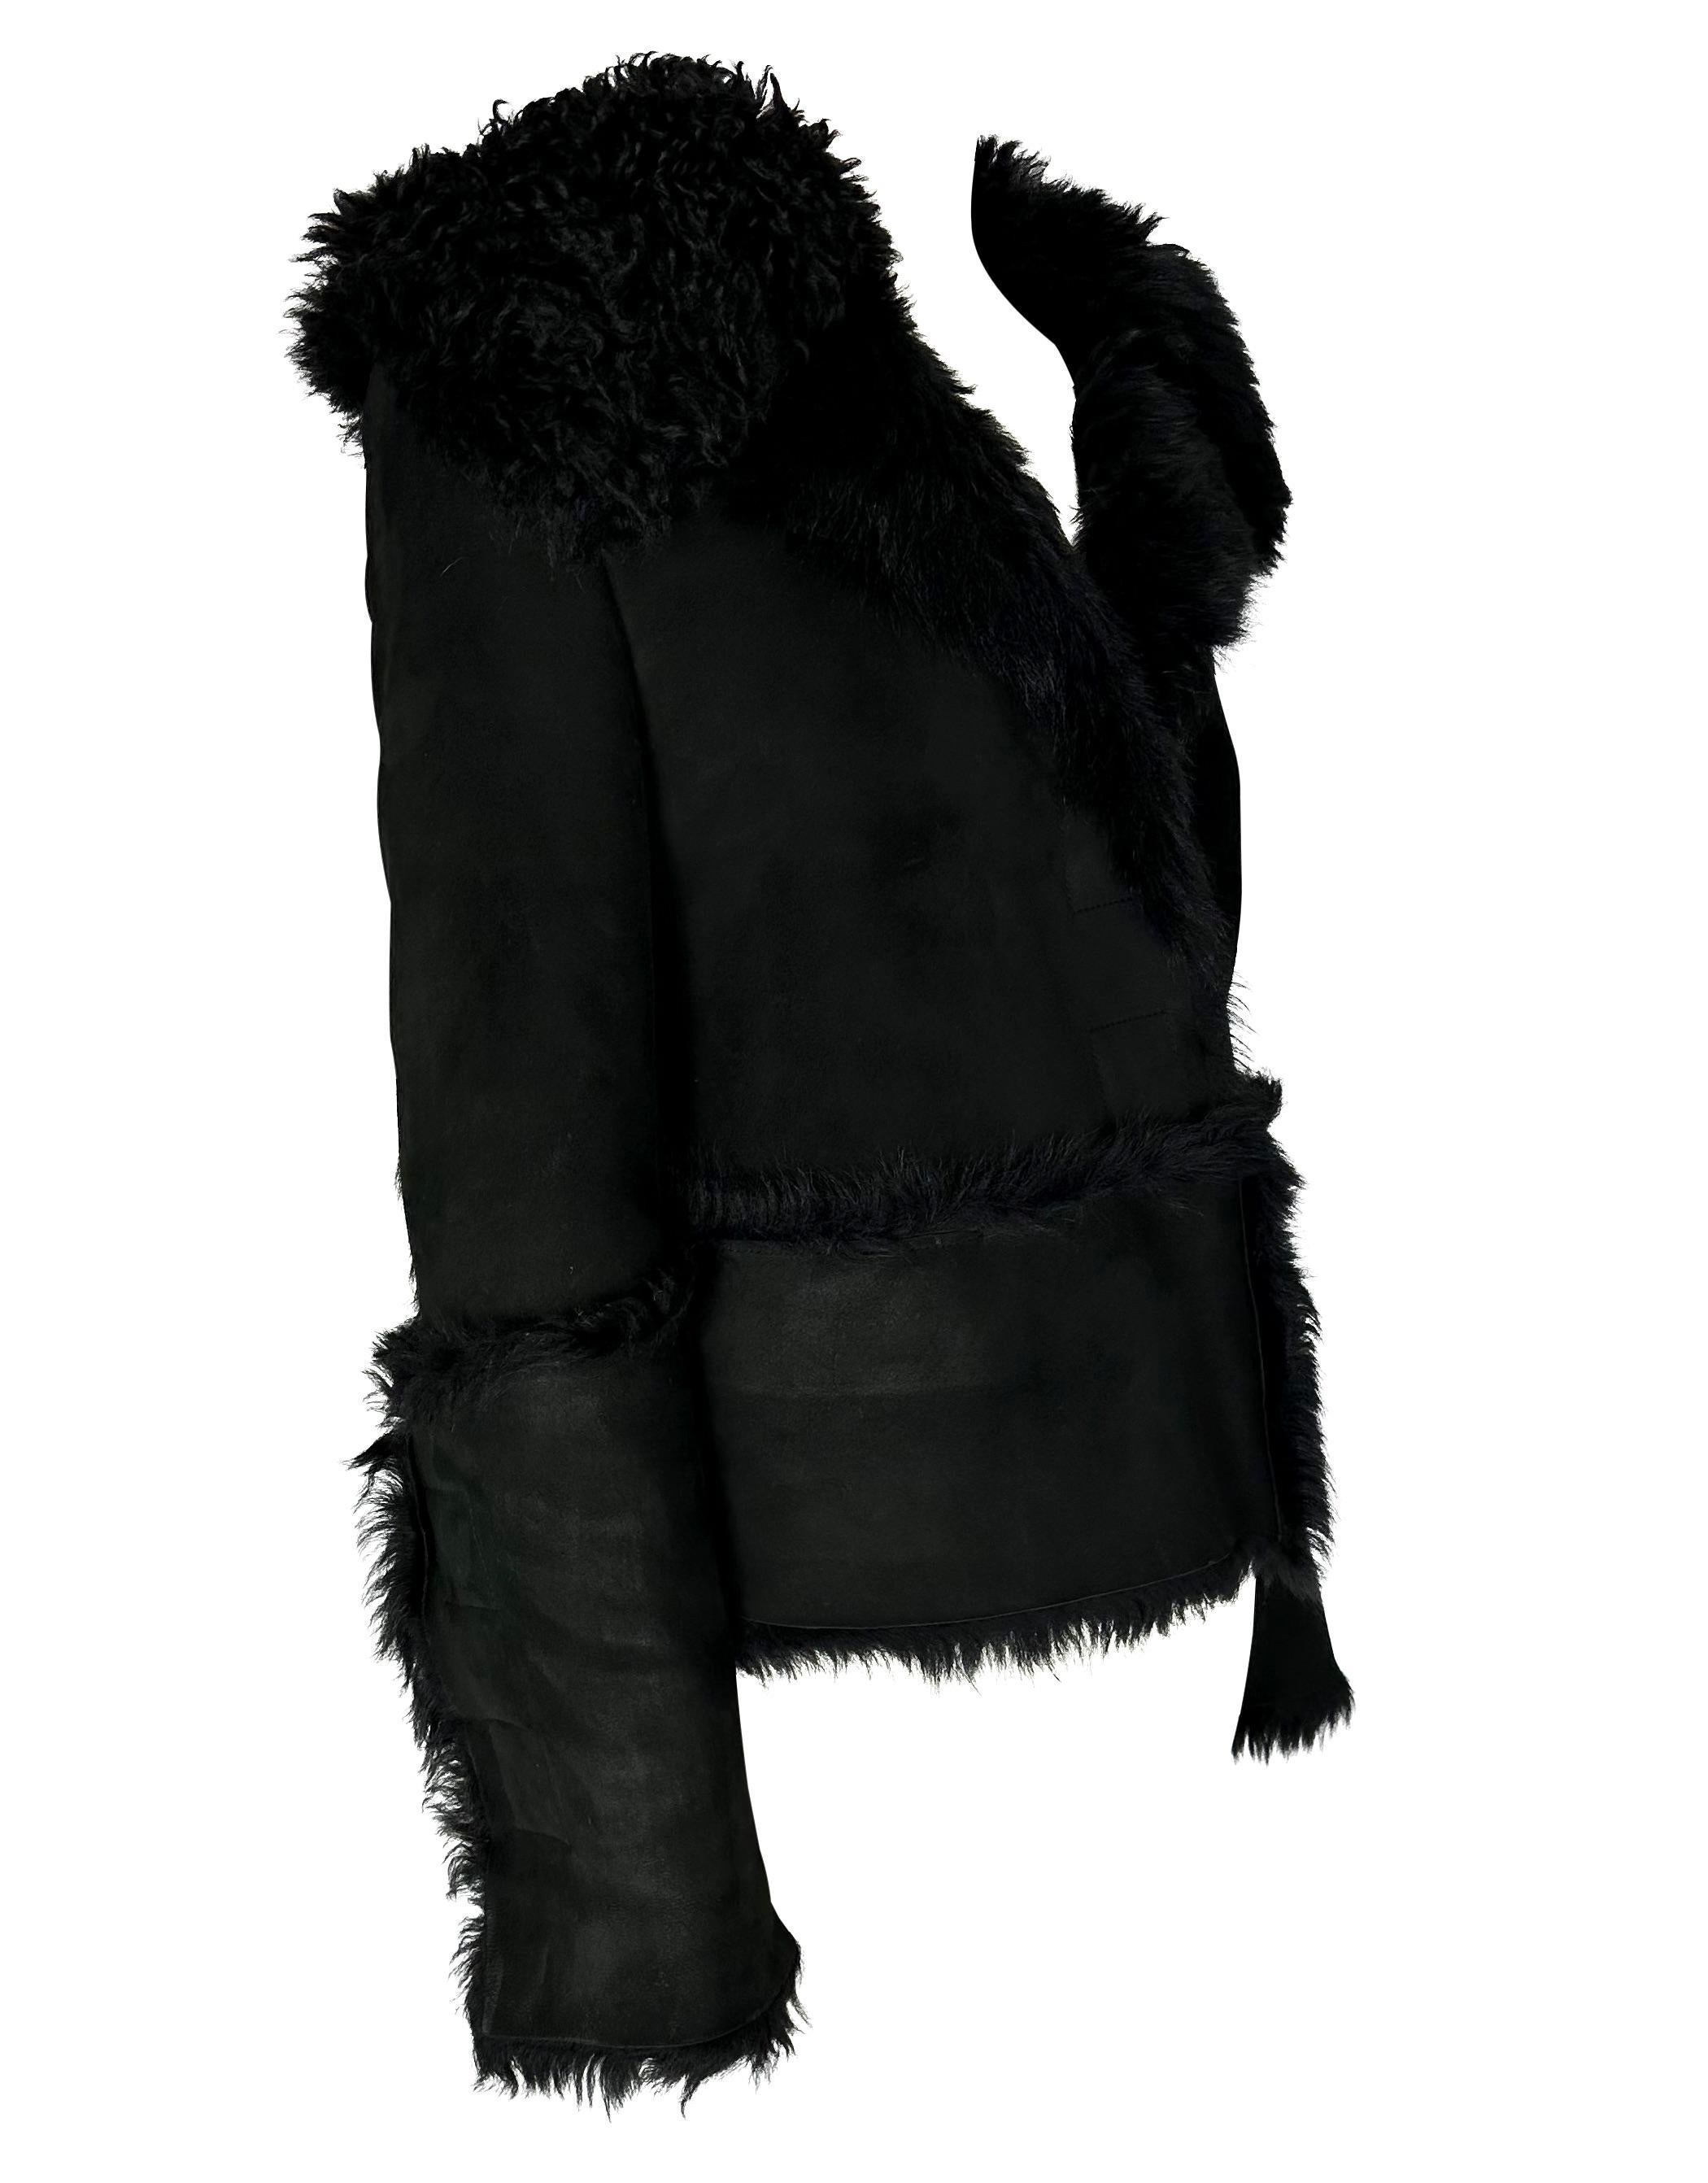 Early 2000s Gucci by Tom Ford Black Shearling Suede Oversized Moto-Style Jacket en vente 3